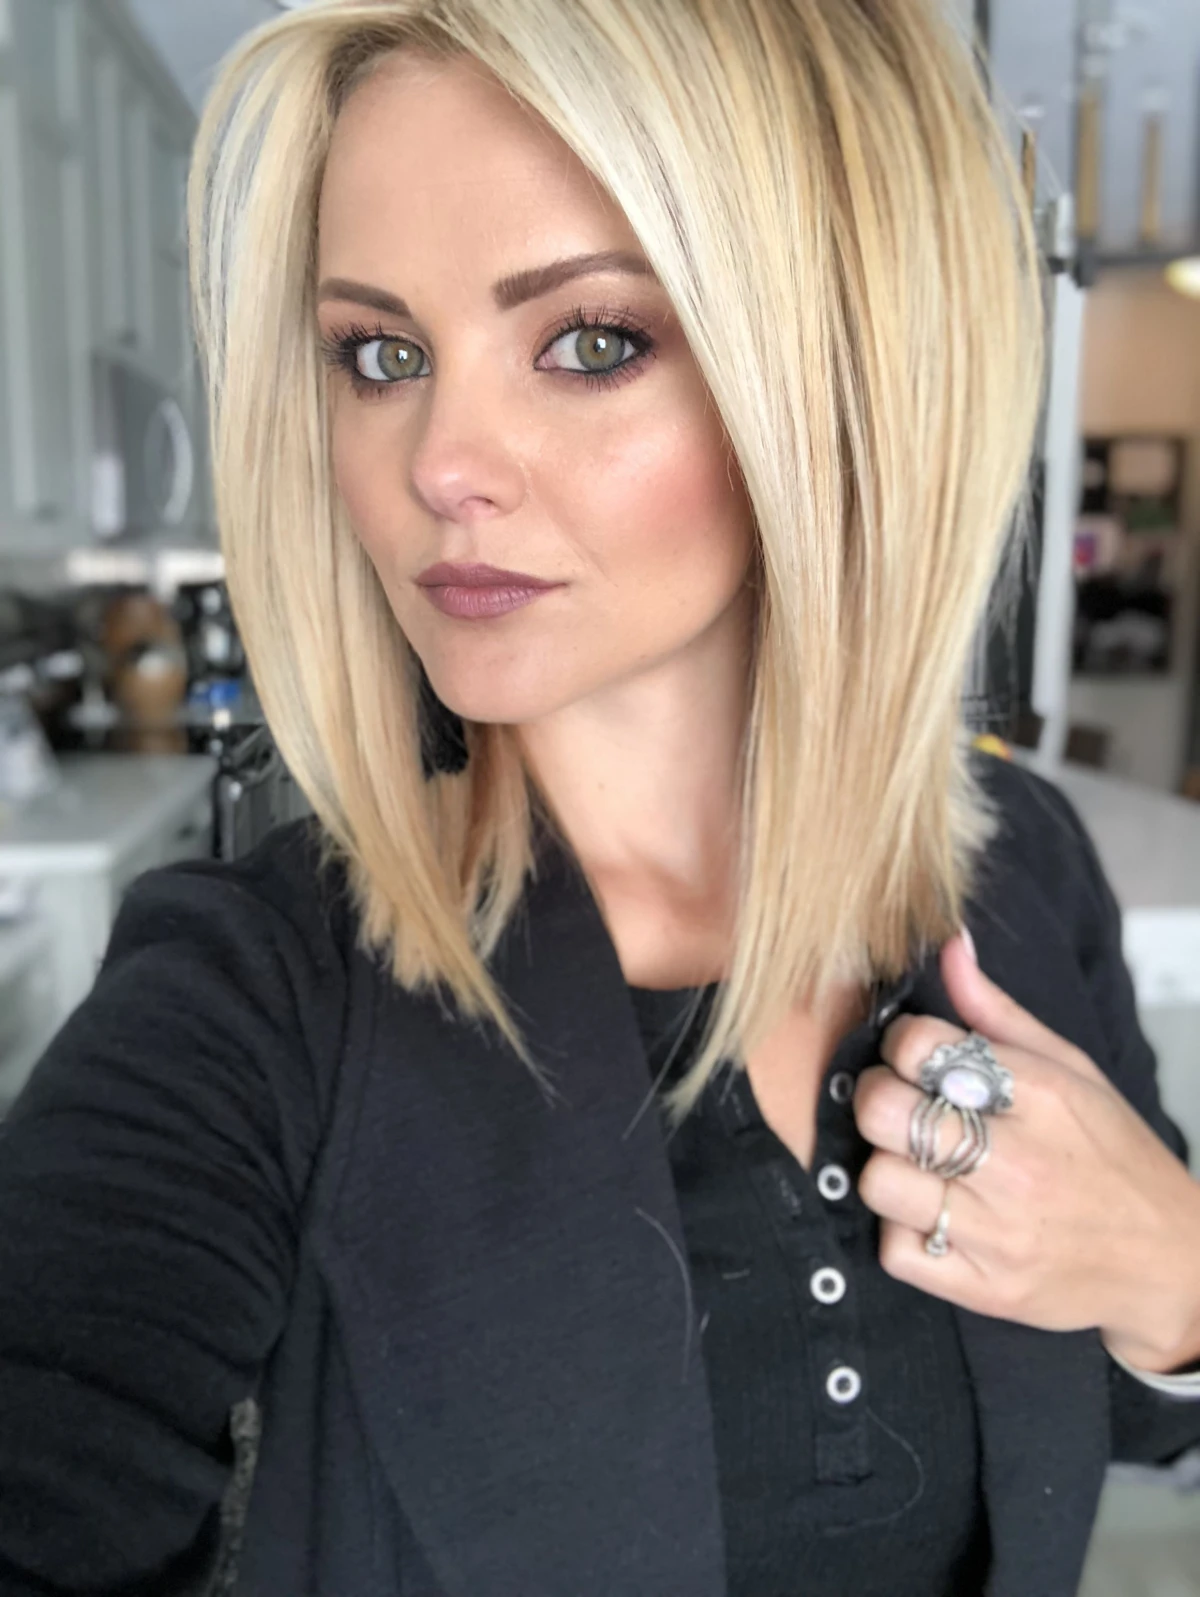 1677408347 542 Long Bob Blunt Cut – an exclusive hairstyle that flatters.webp - Long Bob Blunt Cut – an exclusive hairstyle that flatters women with all face shapes